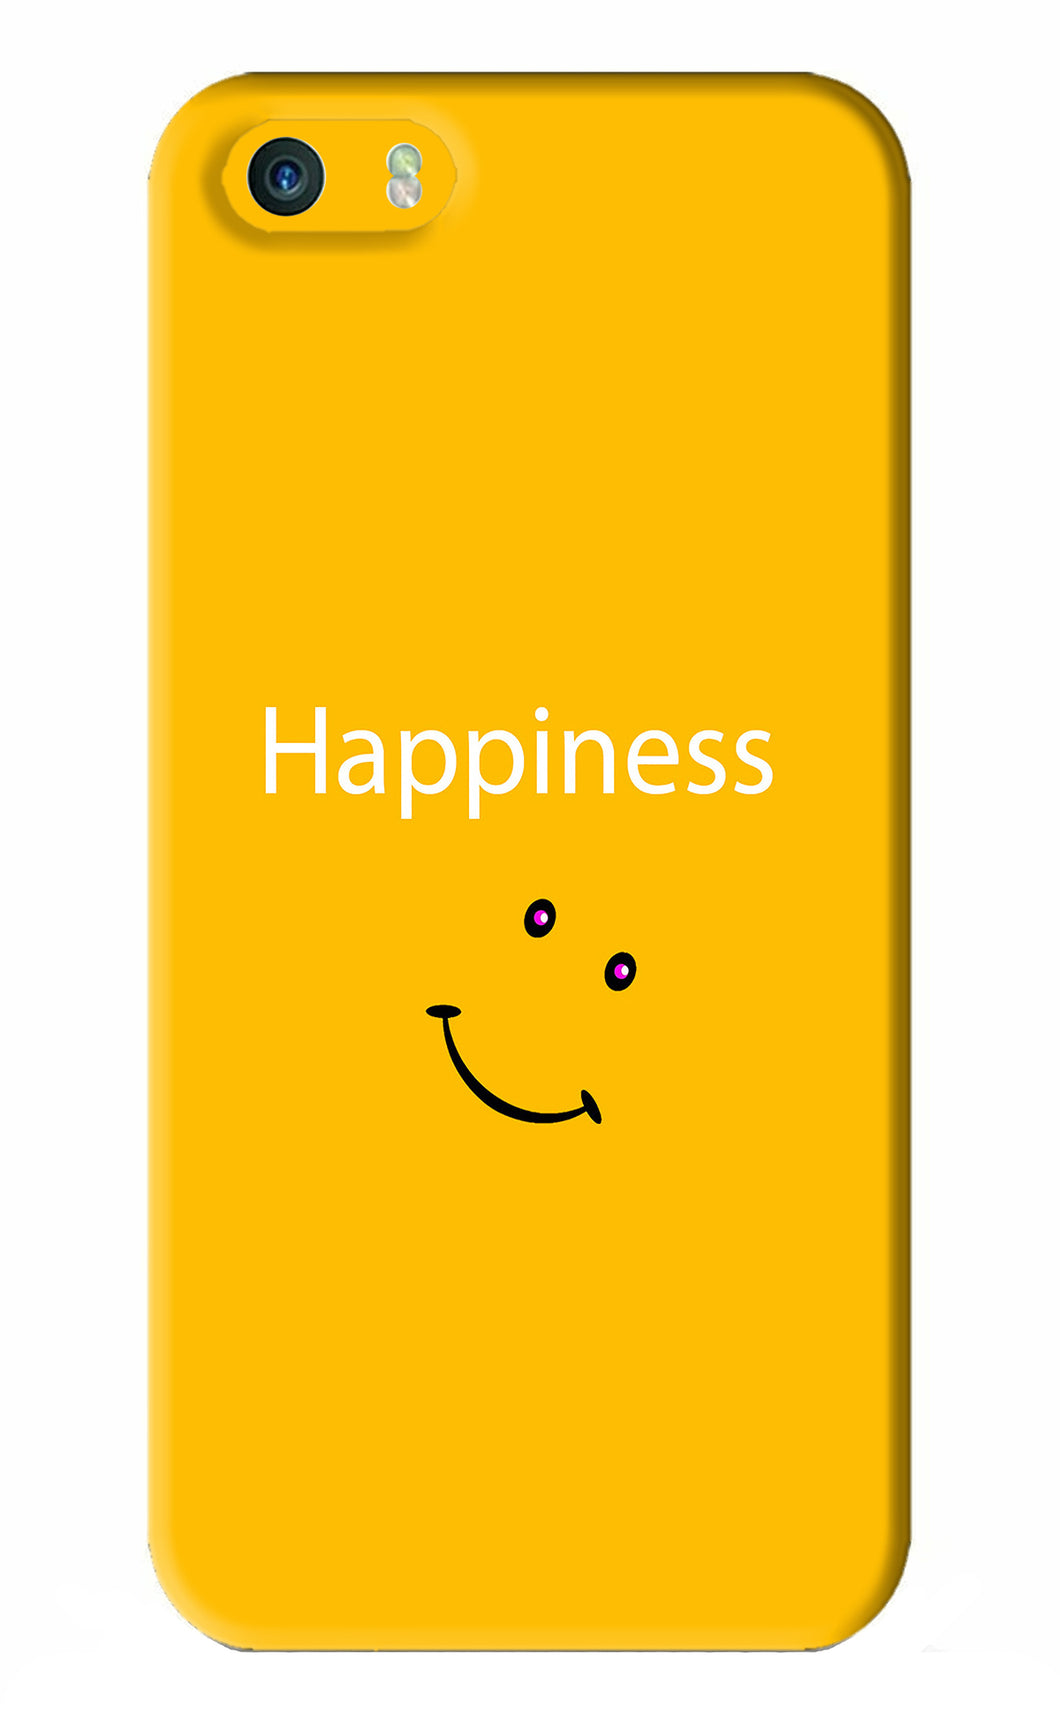 Happiness With Smiley iPhone 5 Back Skin Wrap